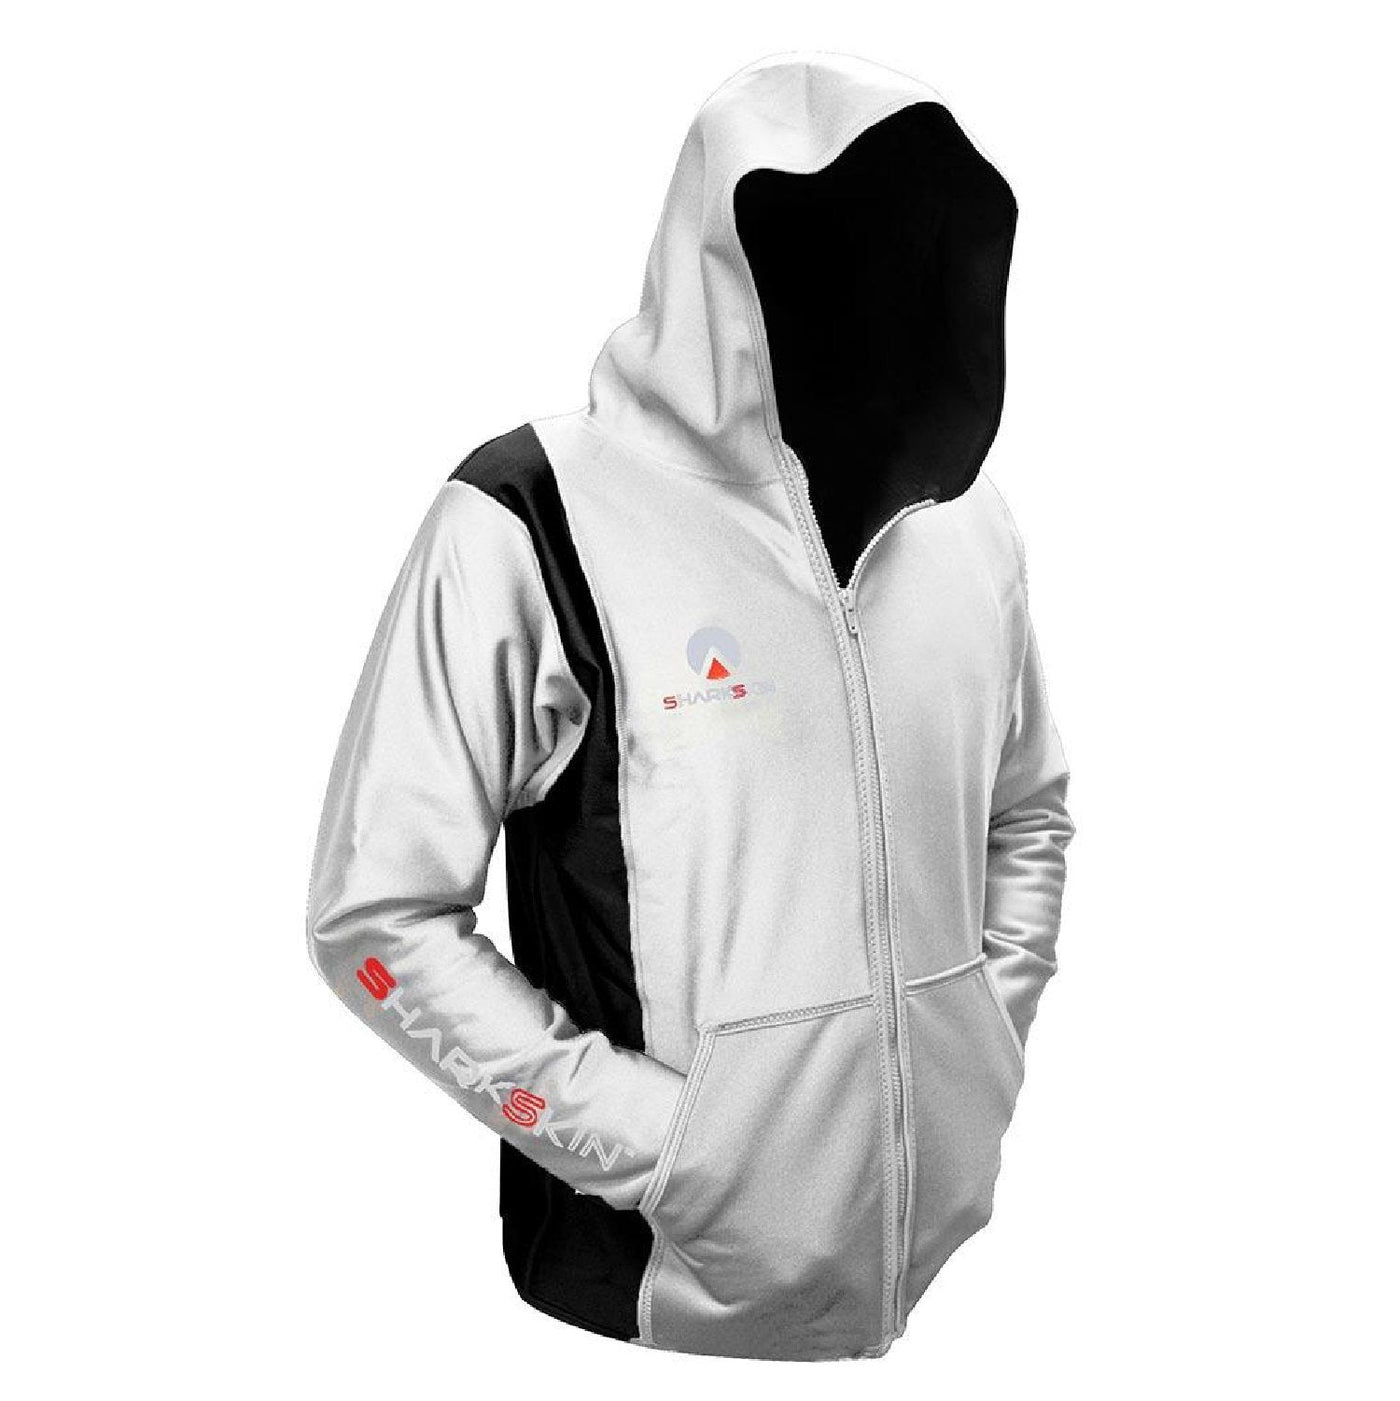 CHILLPROOF JACKET WITH HOOD MENS